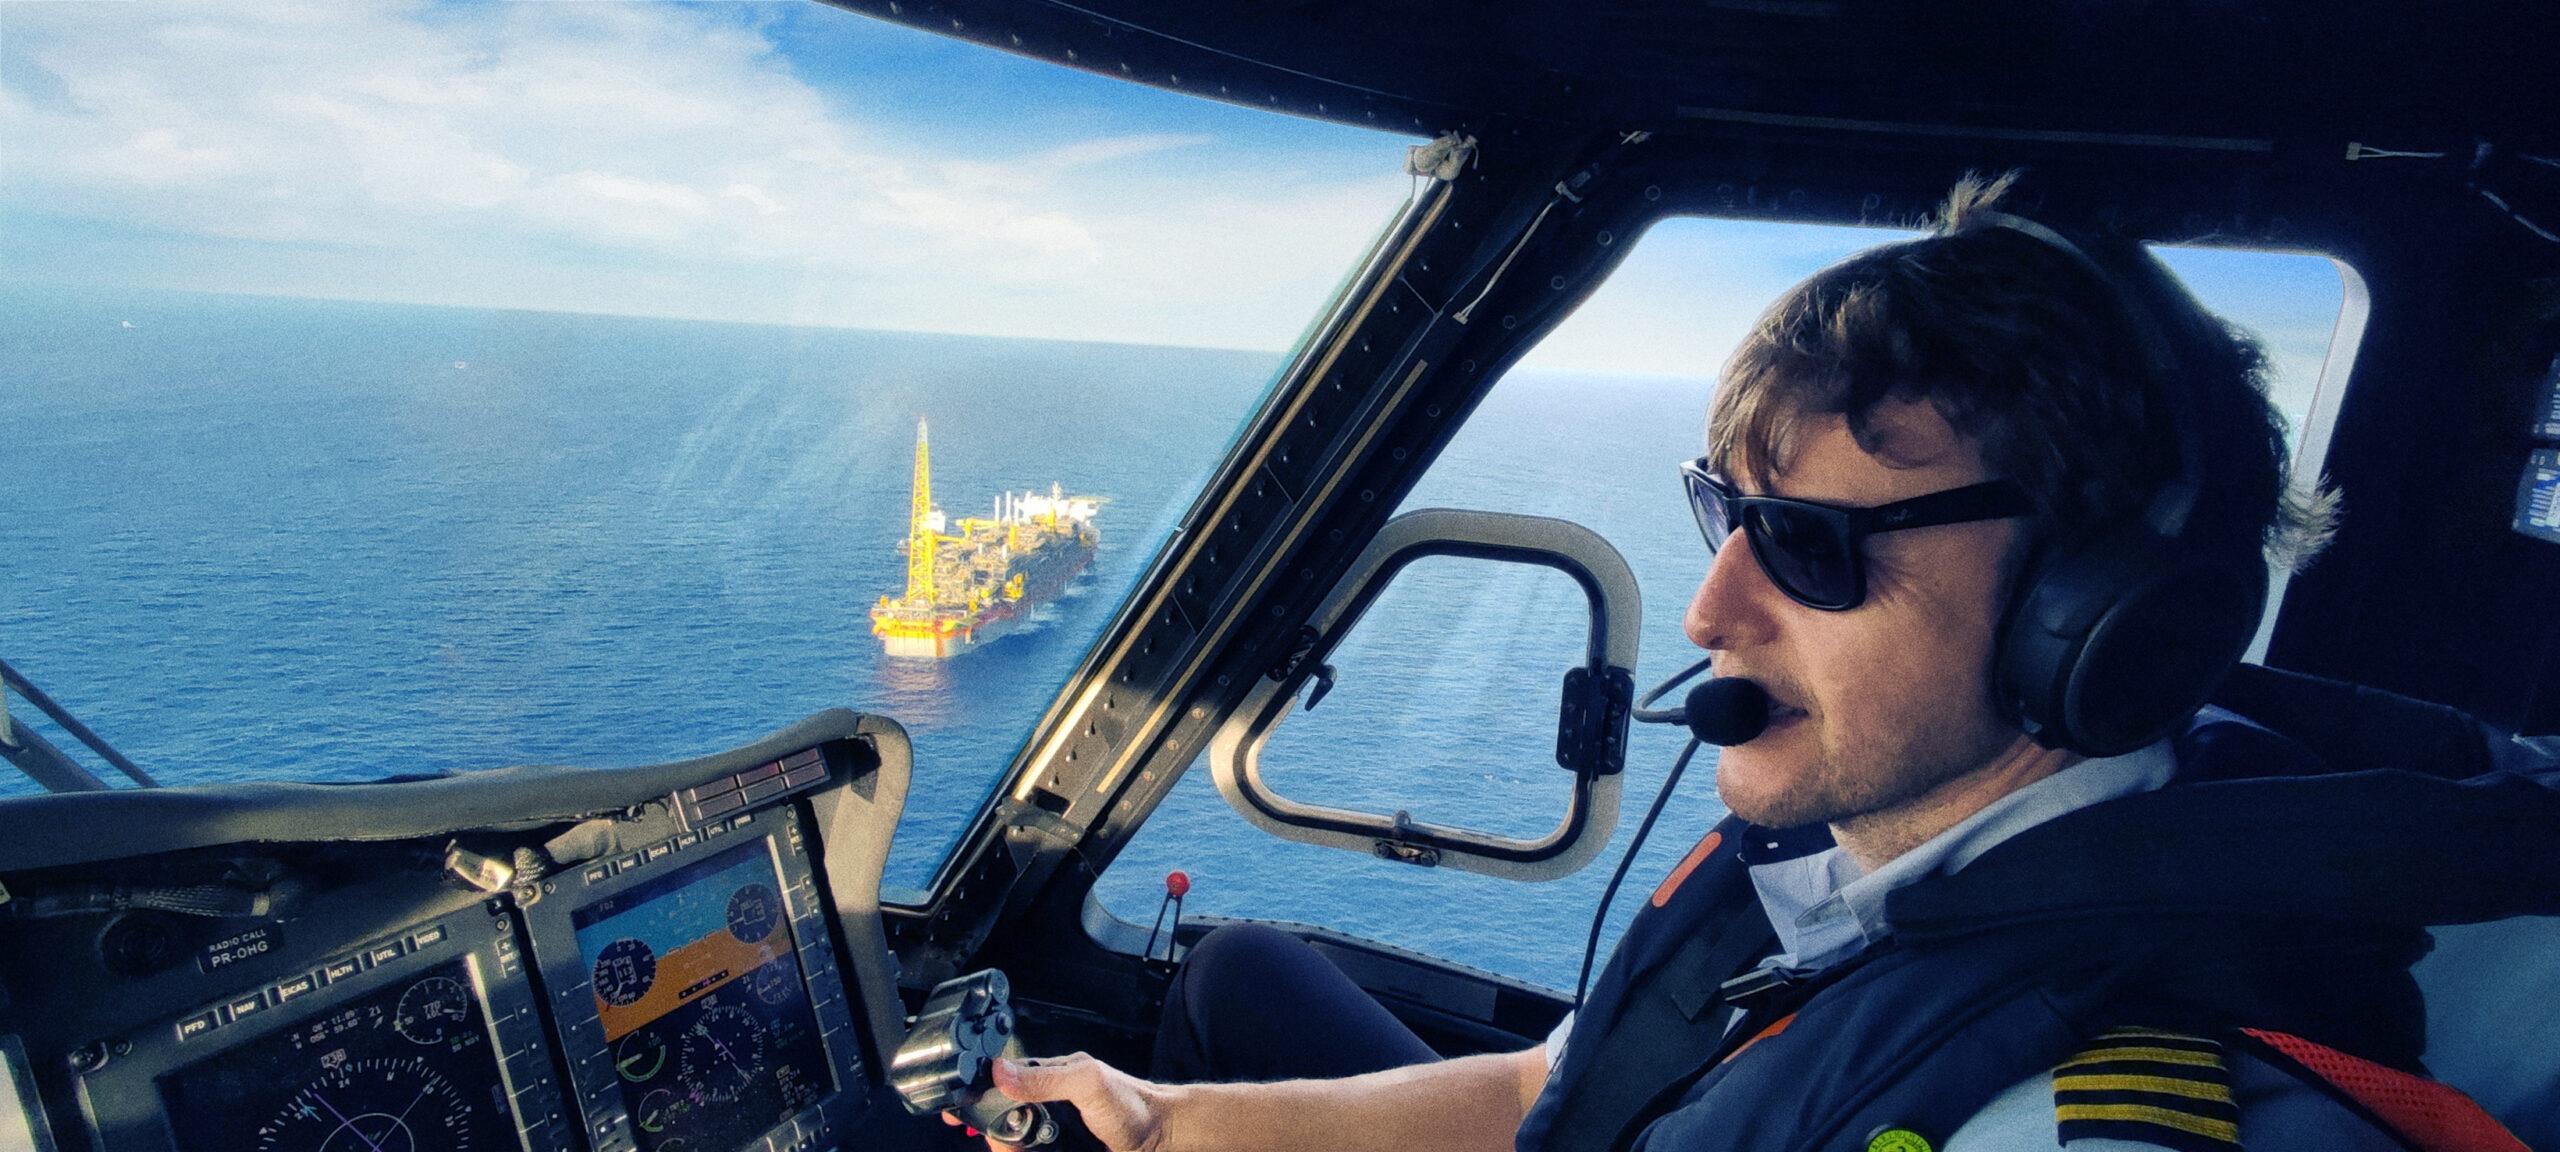 image of pilot flying helicopter over ocean